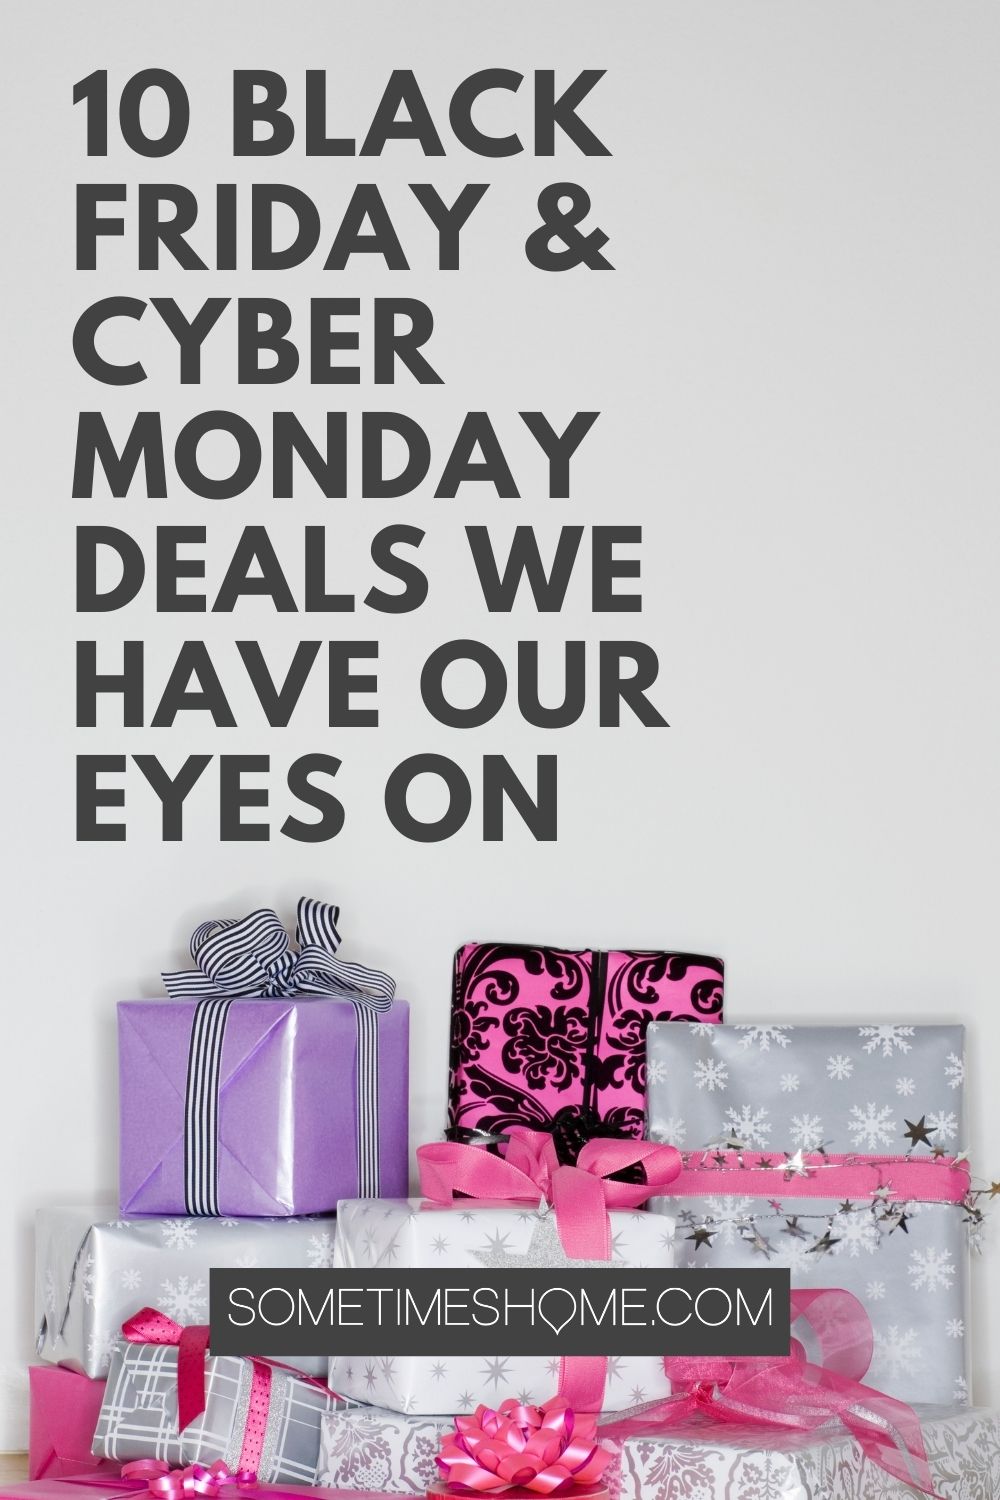 Pinterest image for 10 Black Friday and Cyber Monday Deals we have our eyes on.